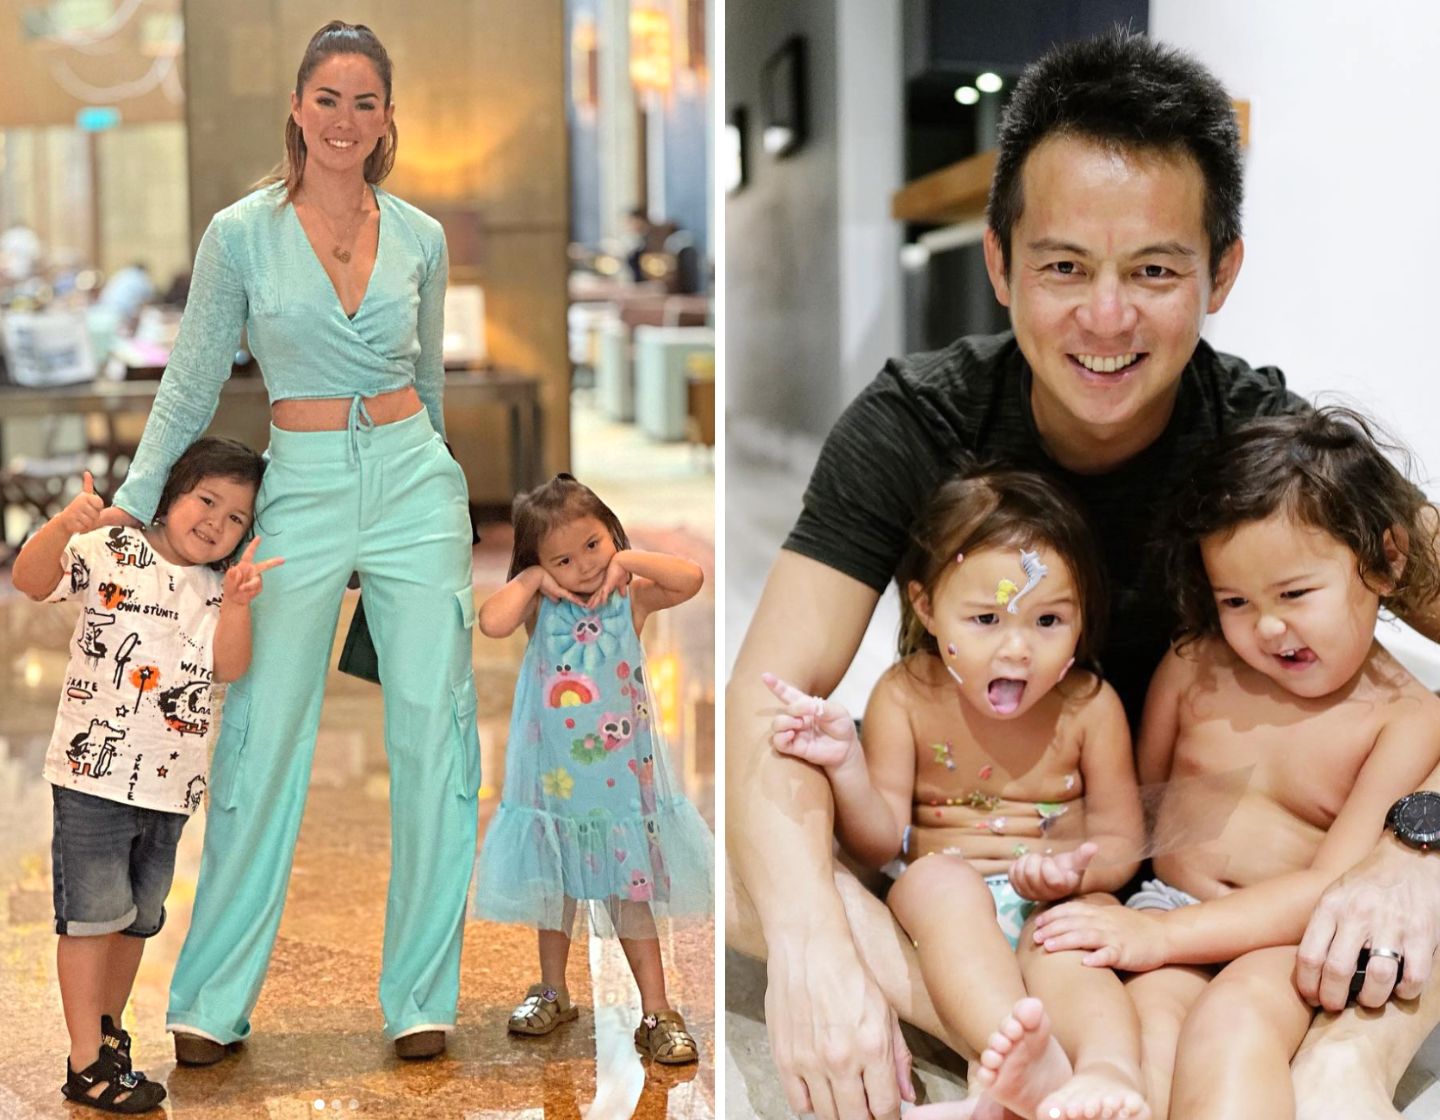 Claire jedrek racing car driver yuey tan power couple on parenting